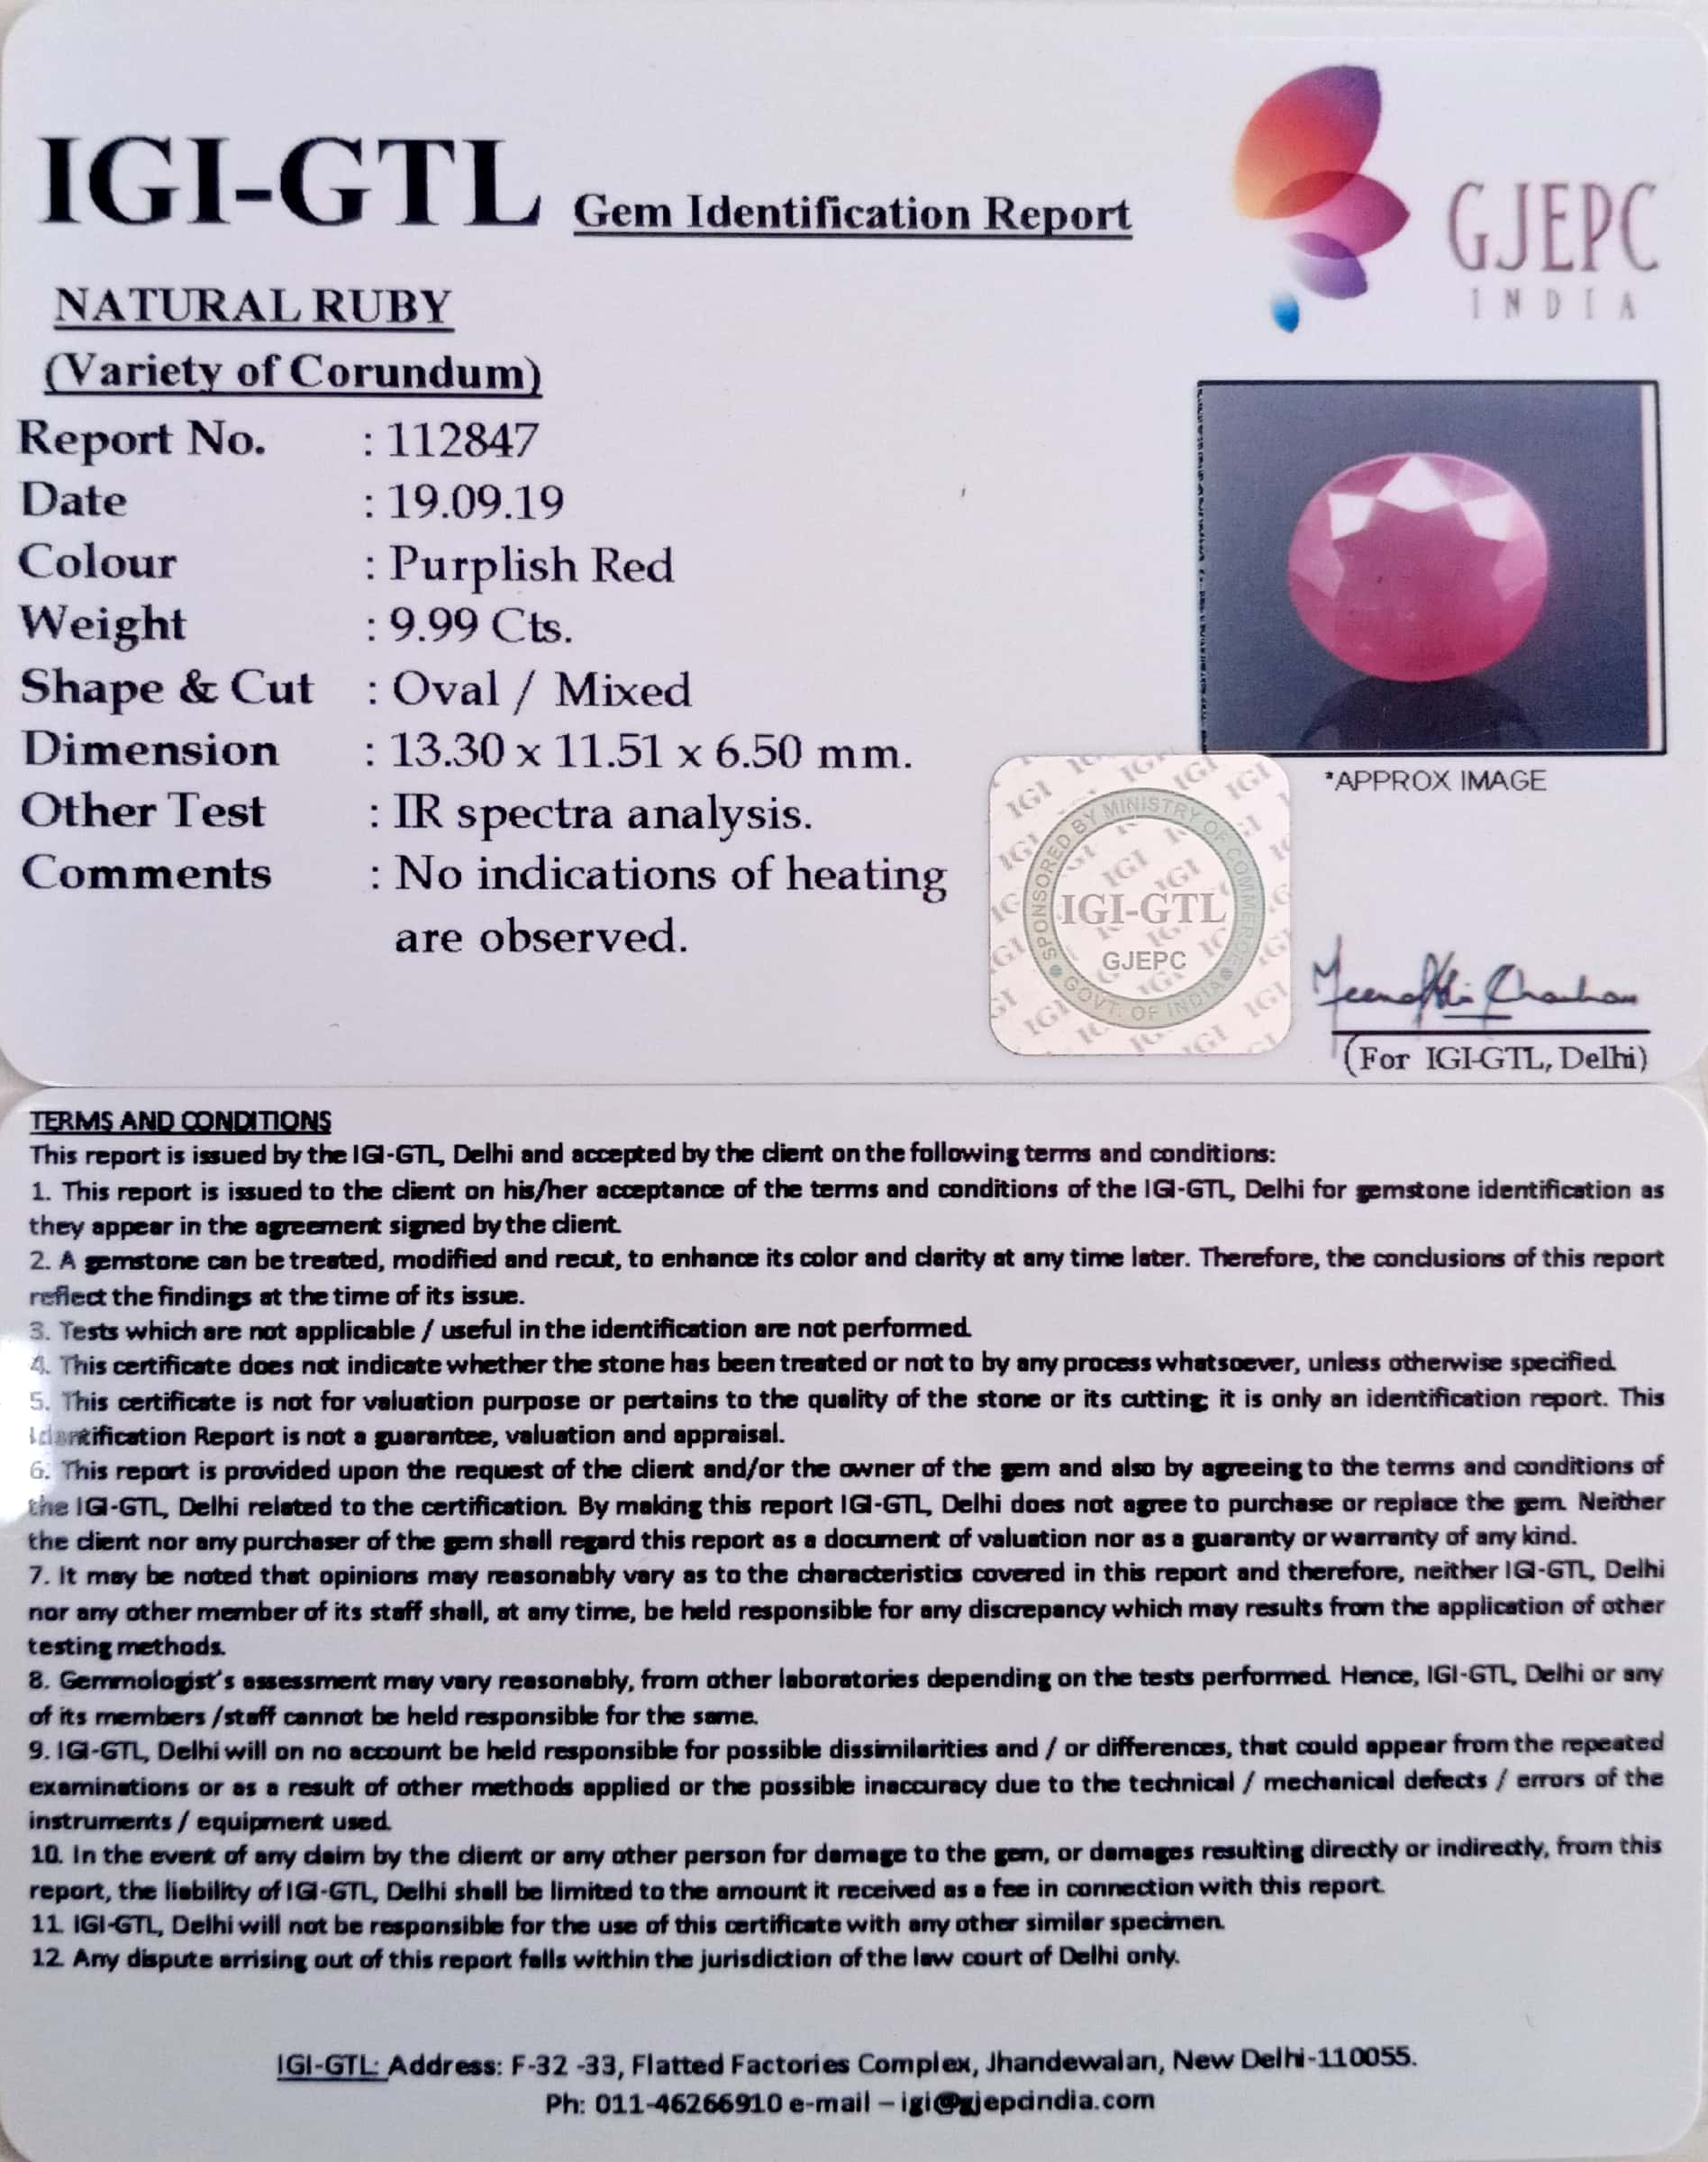 11.08 Ratti Natural Neo Burma Ruby with Govt. Lab Certificate-(4551)